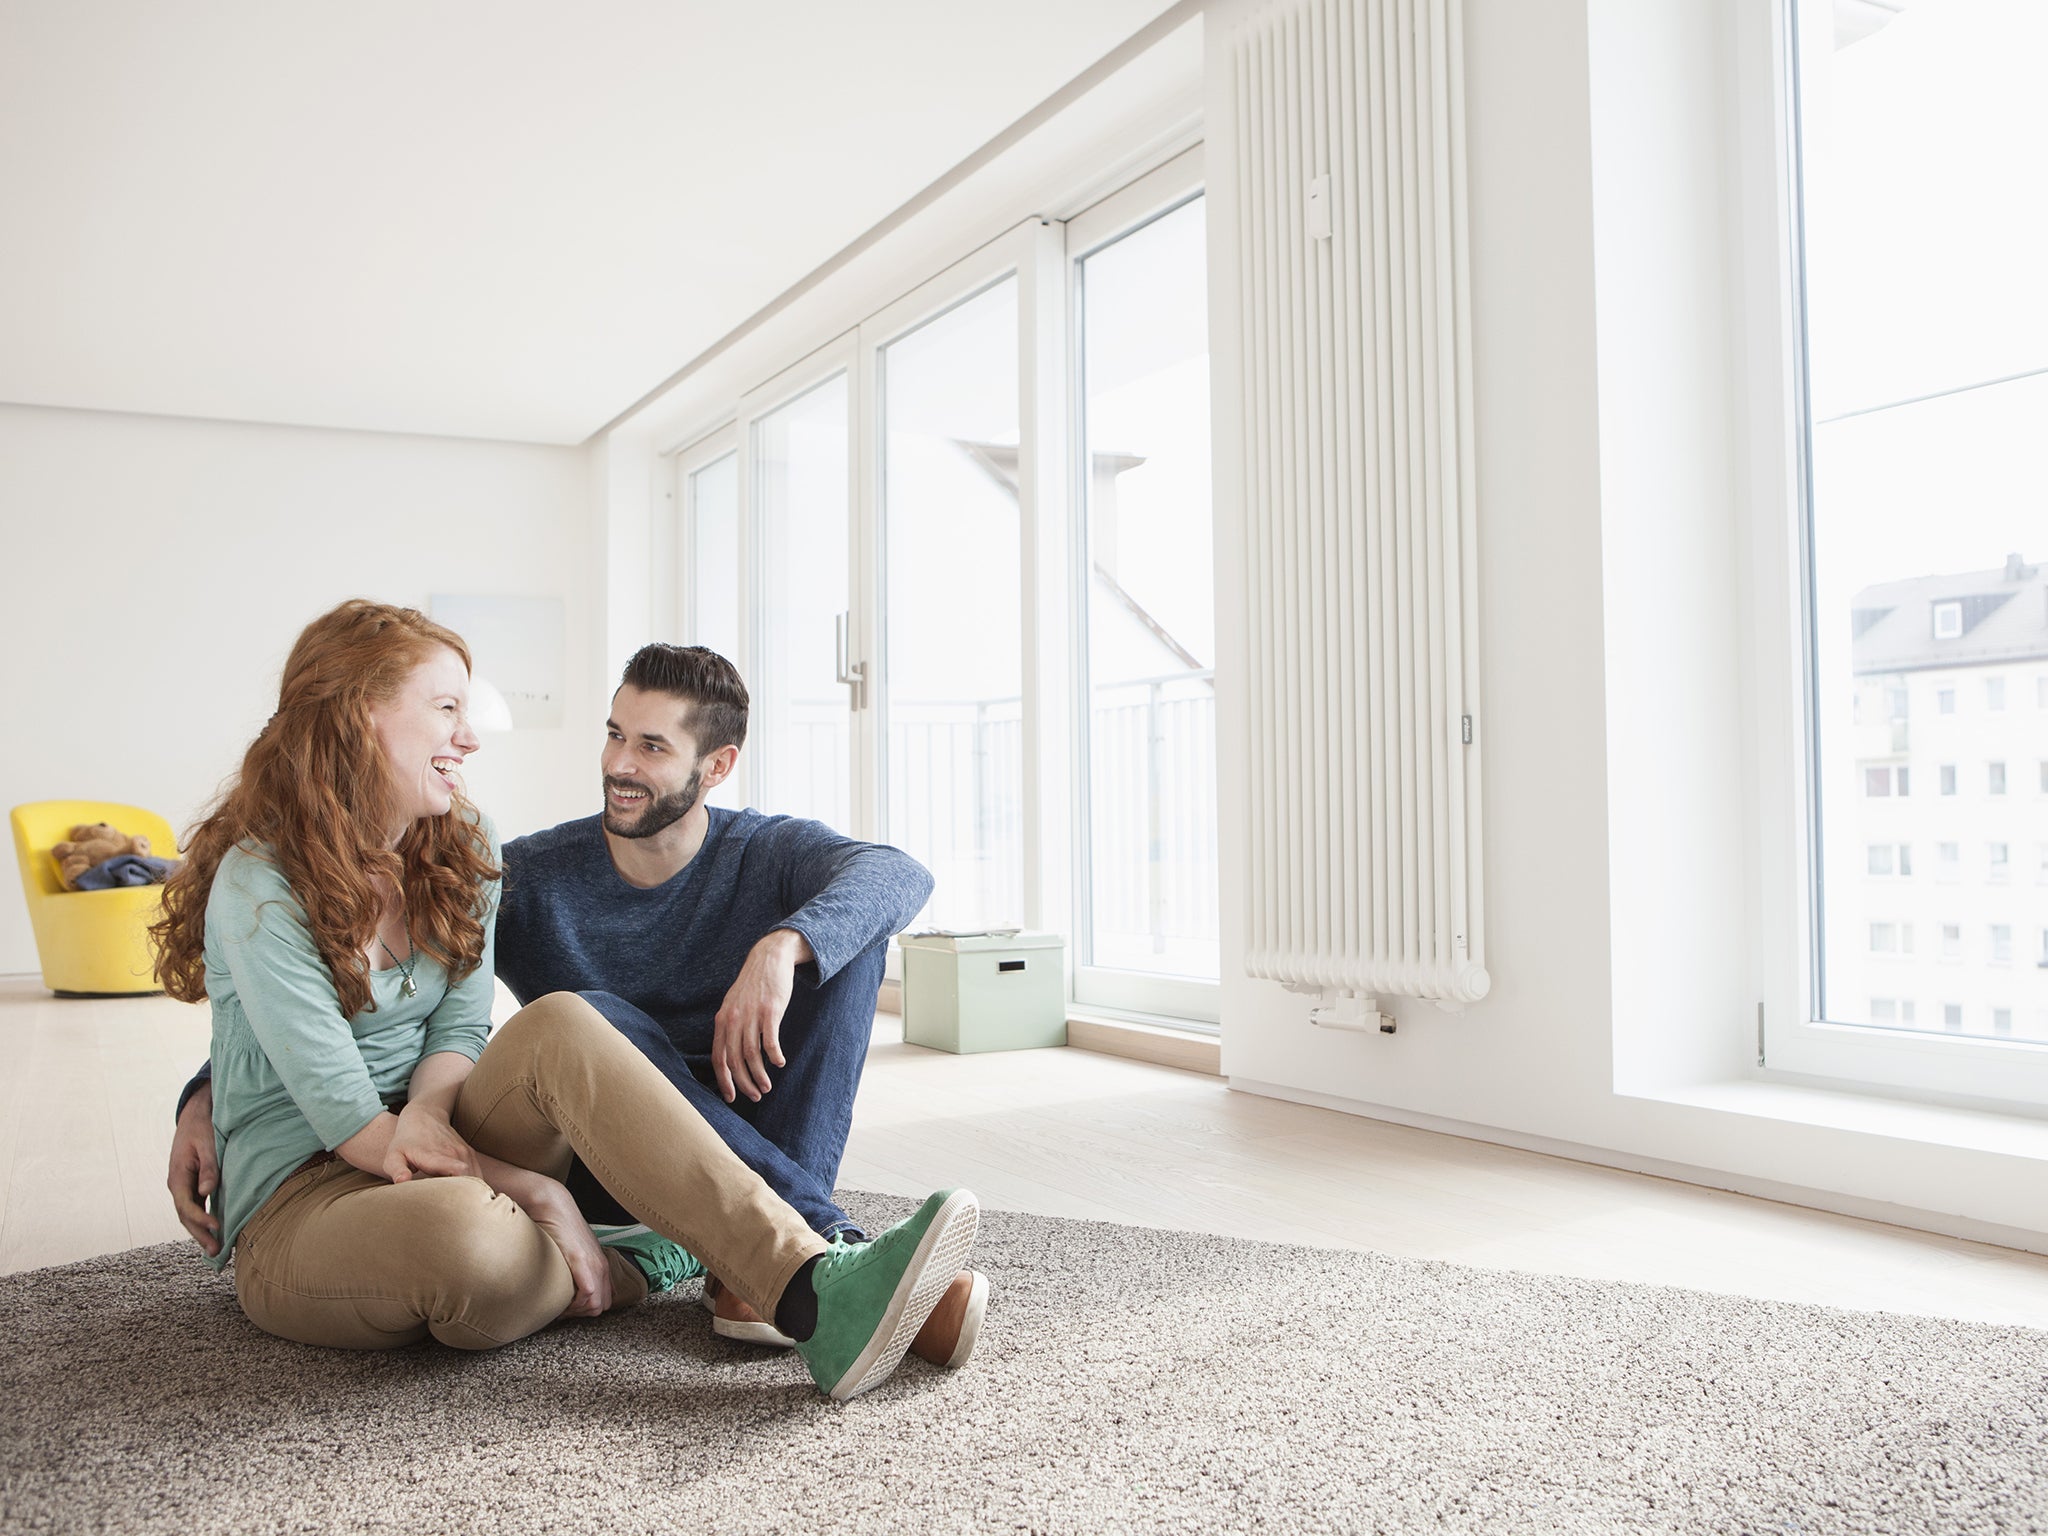 Cohabitation may offer the same emotional benefits as marriage